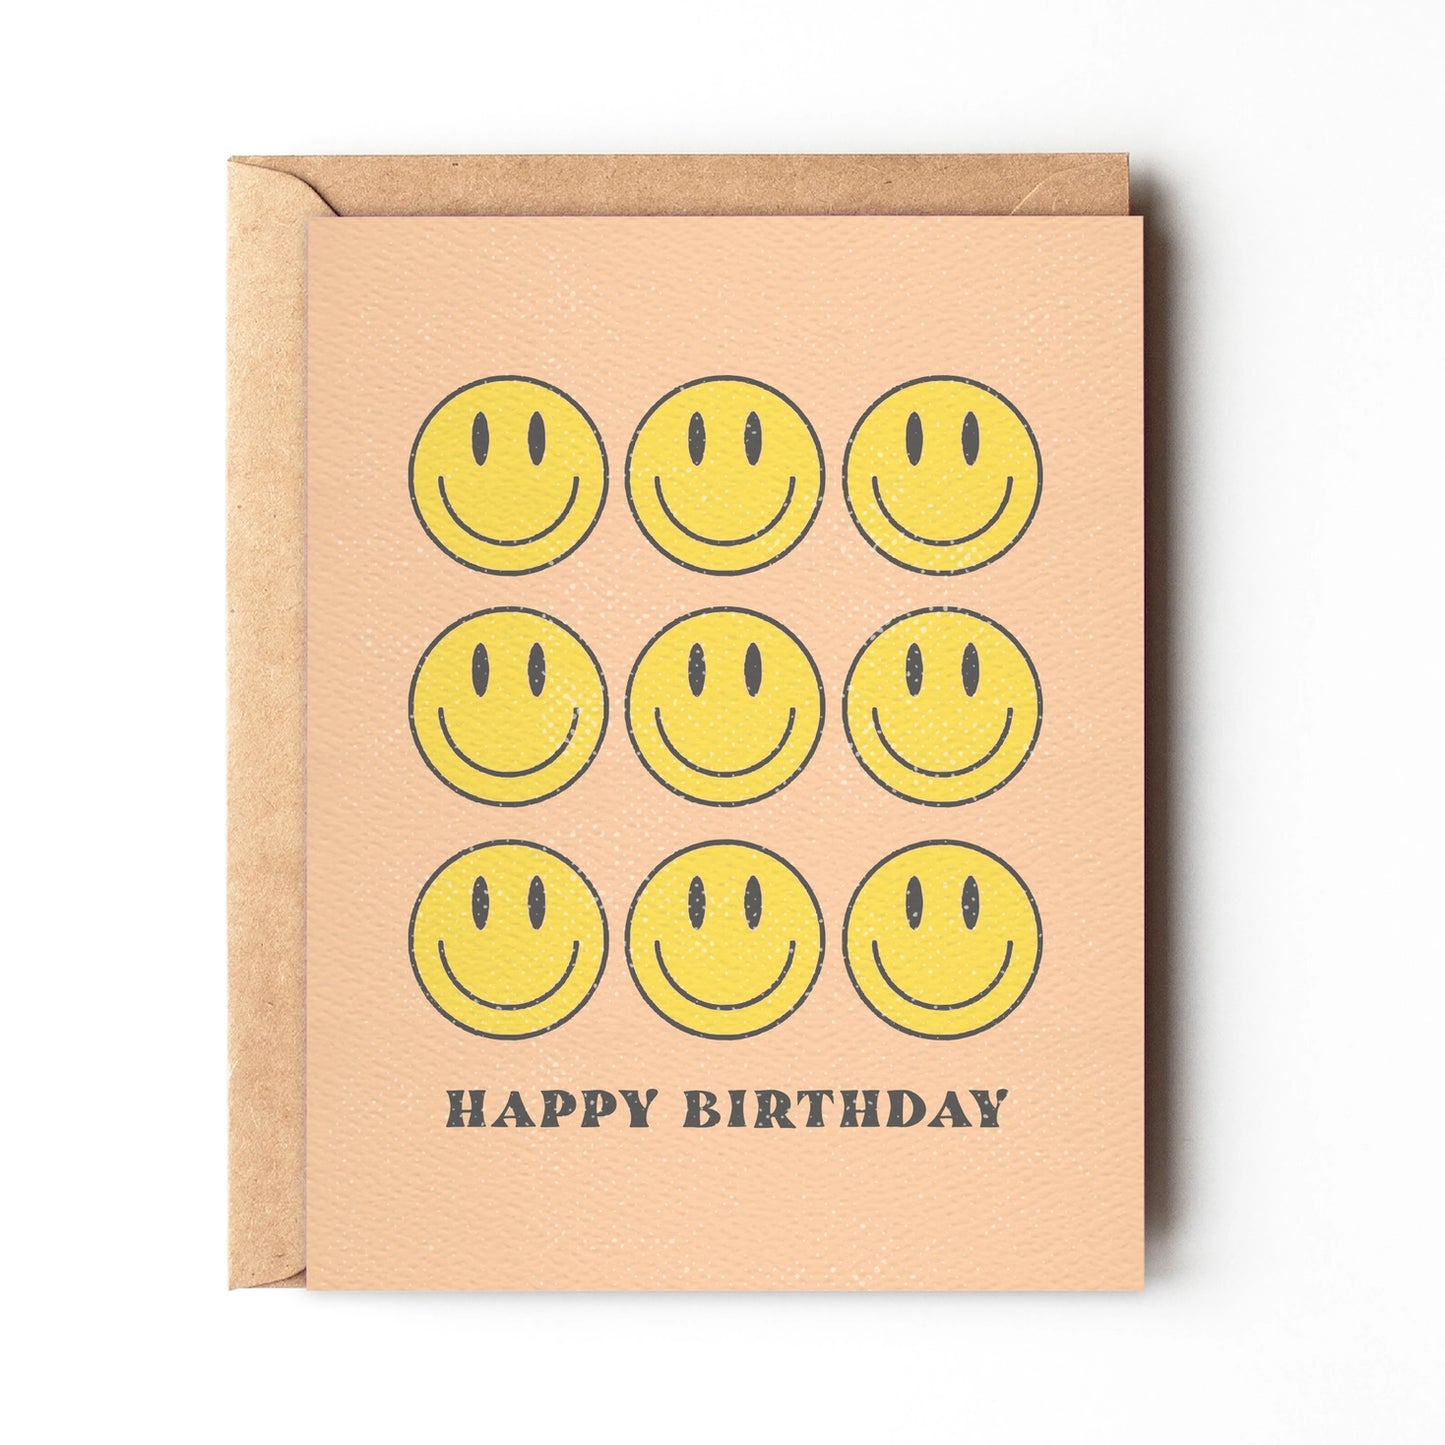 If this card doesn't spread smiles, then we don't know what will! Featuring lots of smiley faces, this fun, lighthearted birthday card will make someone's day.  ☀ Size 4.25" x 5.5";  Blank inside  ☀ Digital print on a quality, felt textured card  ☀100% recycled envelope  ☀ Packed in an eco-friendly biodegradable clear sleeve  ☀ Made in the USA